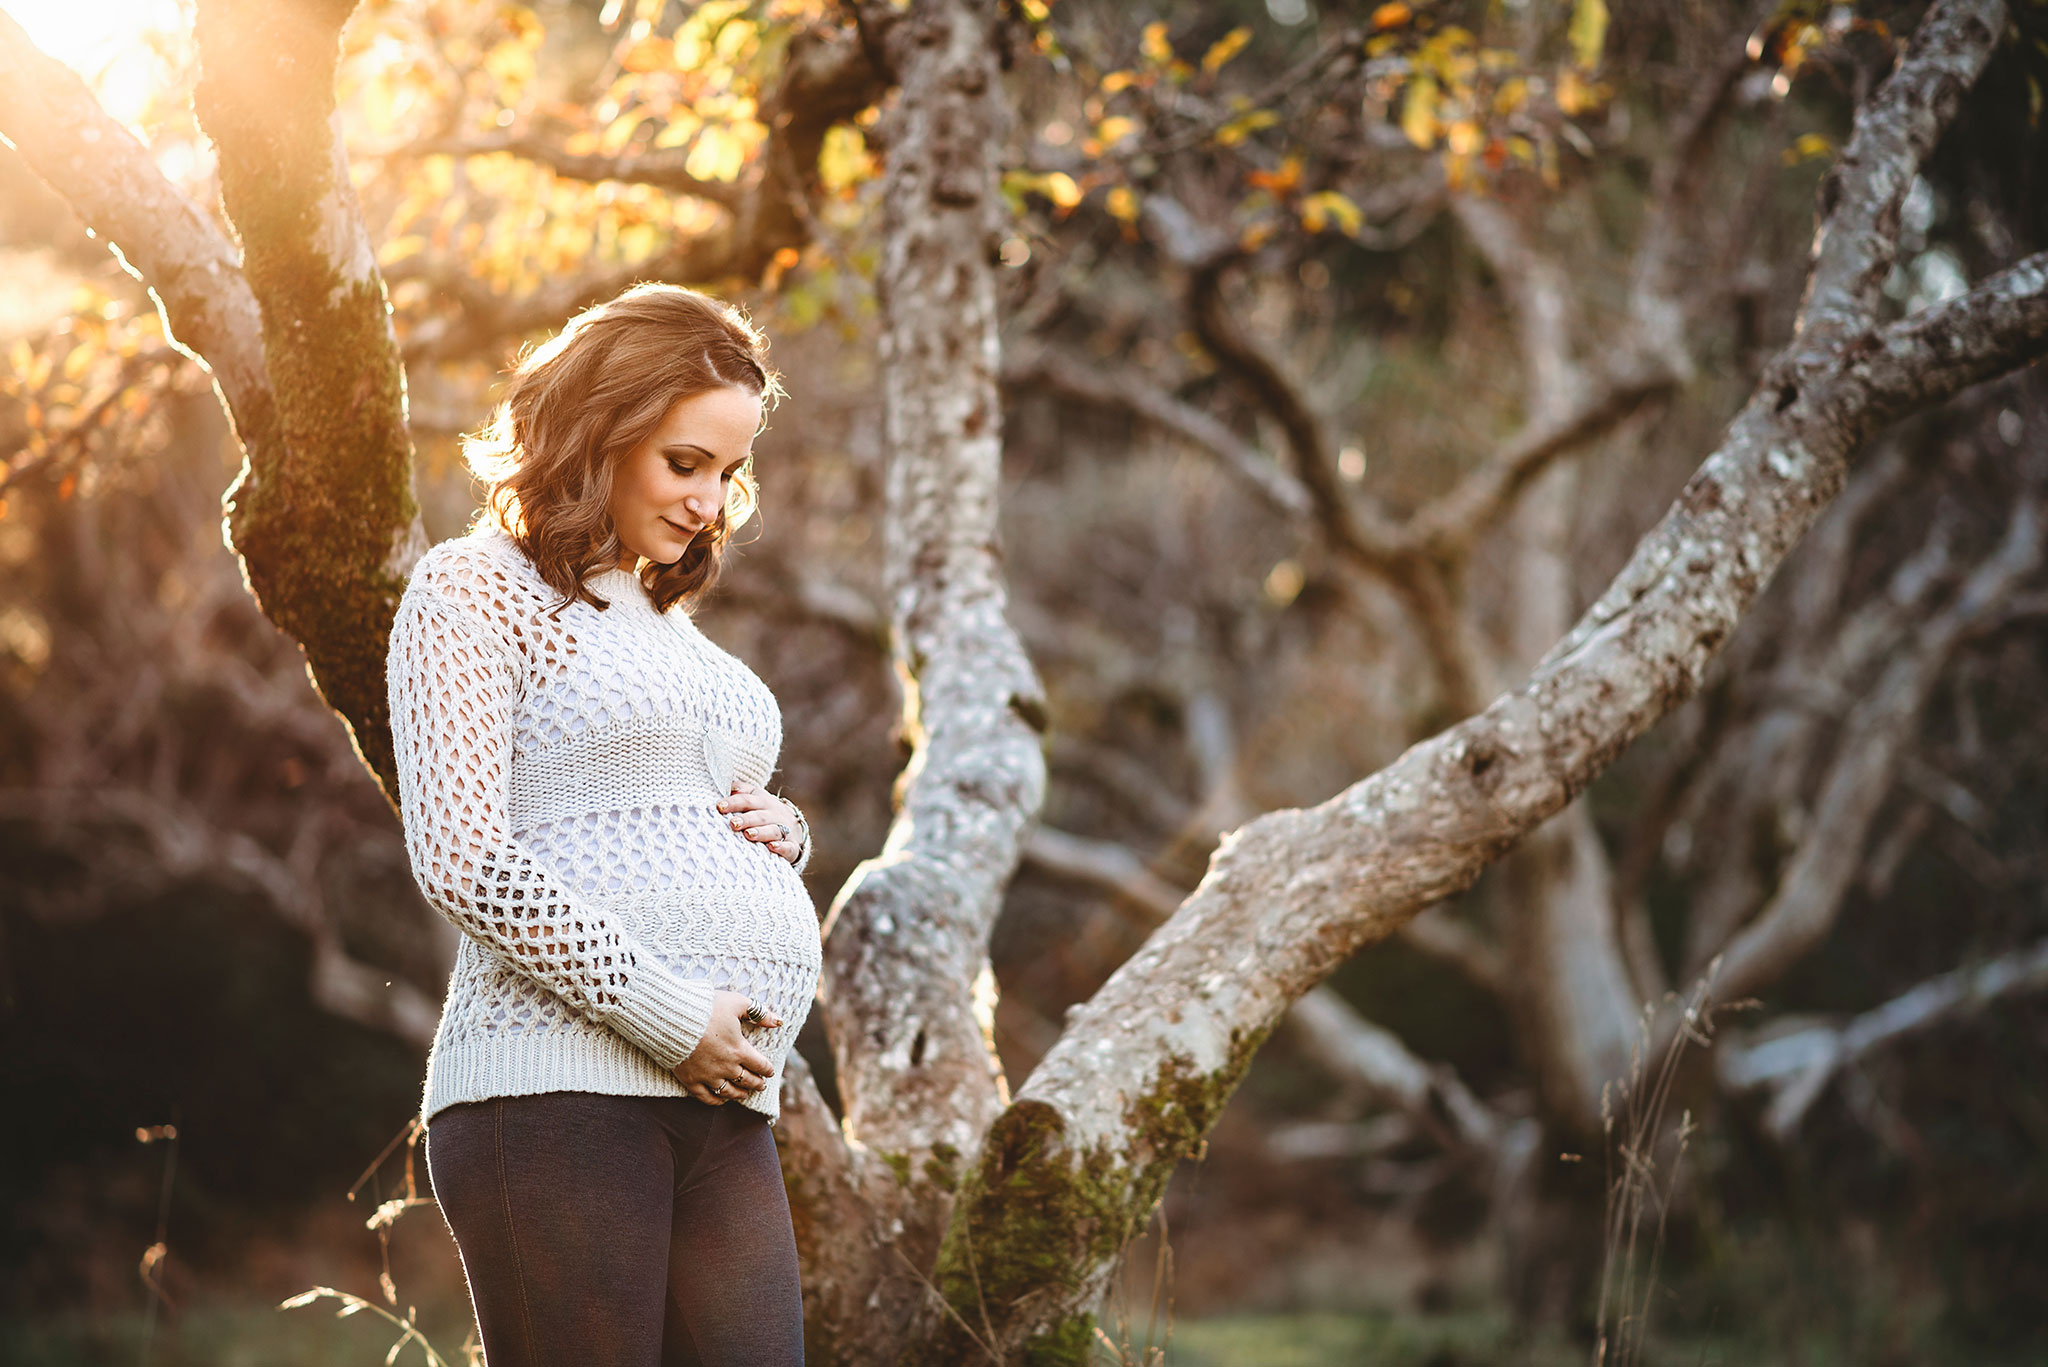 Fall maternity photography in a cozy sweater at sunset in East Sooke Park near Victoria.